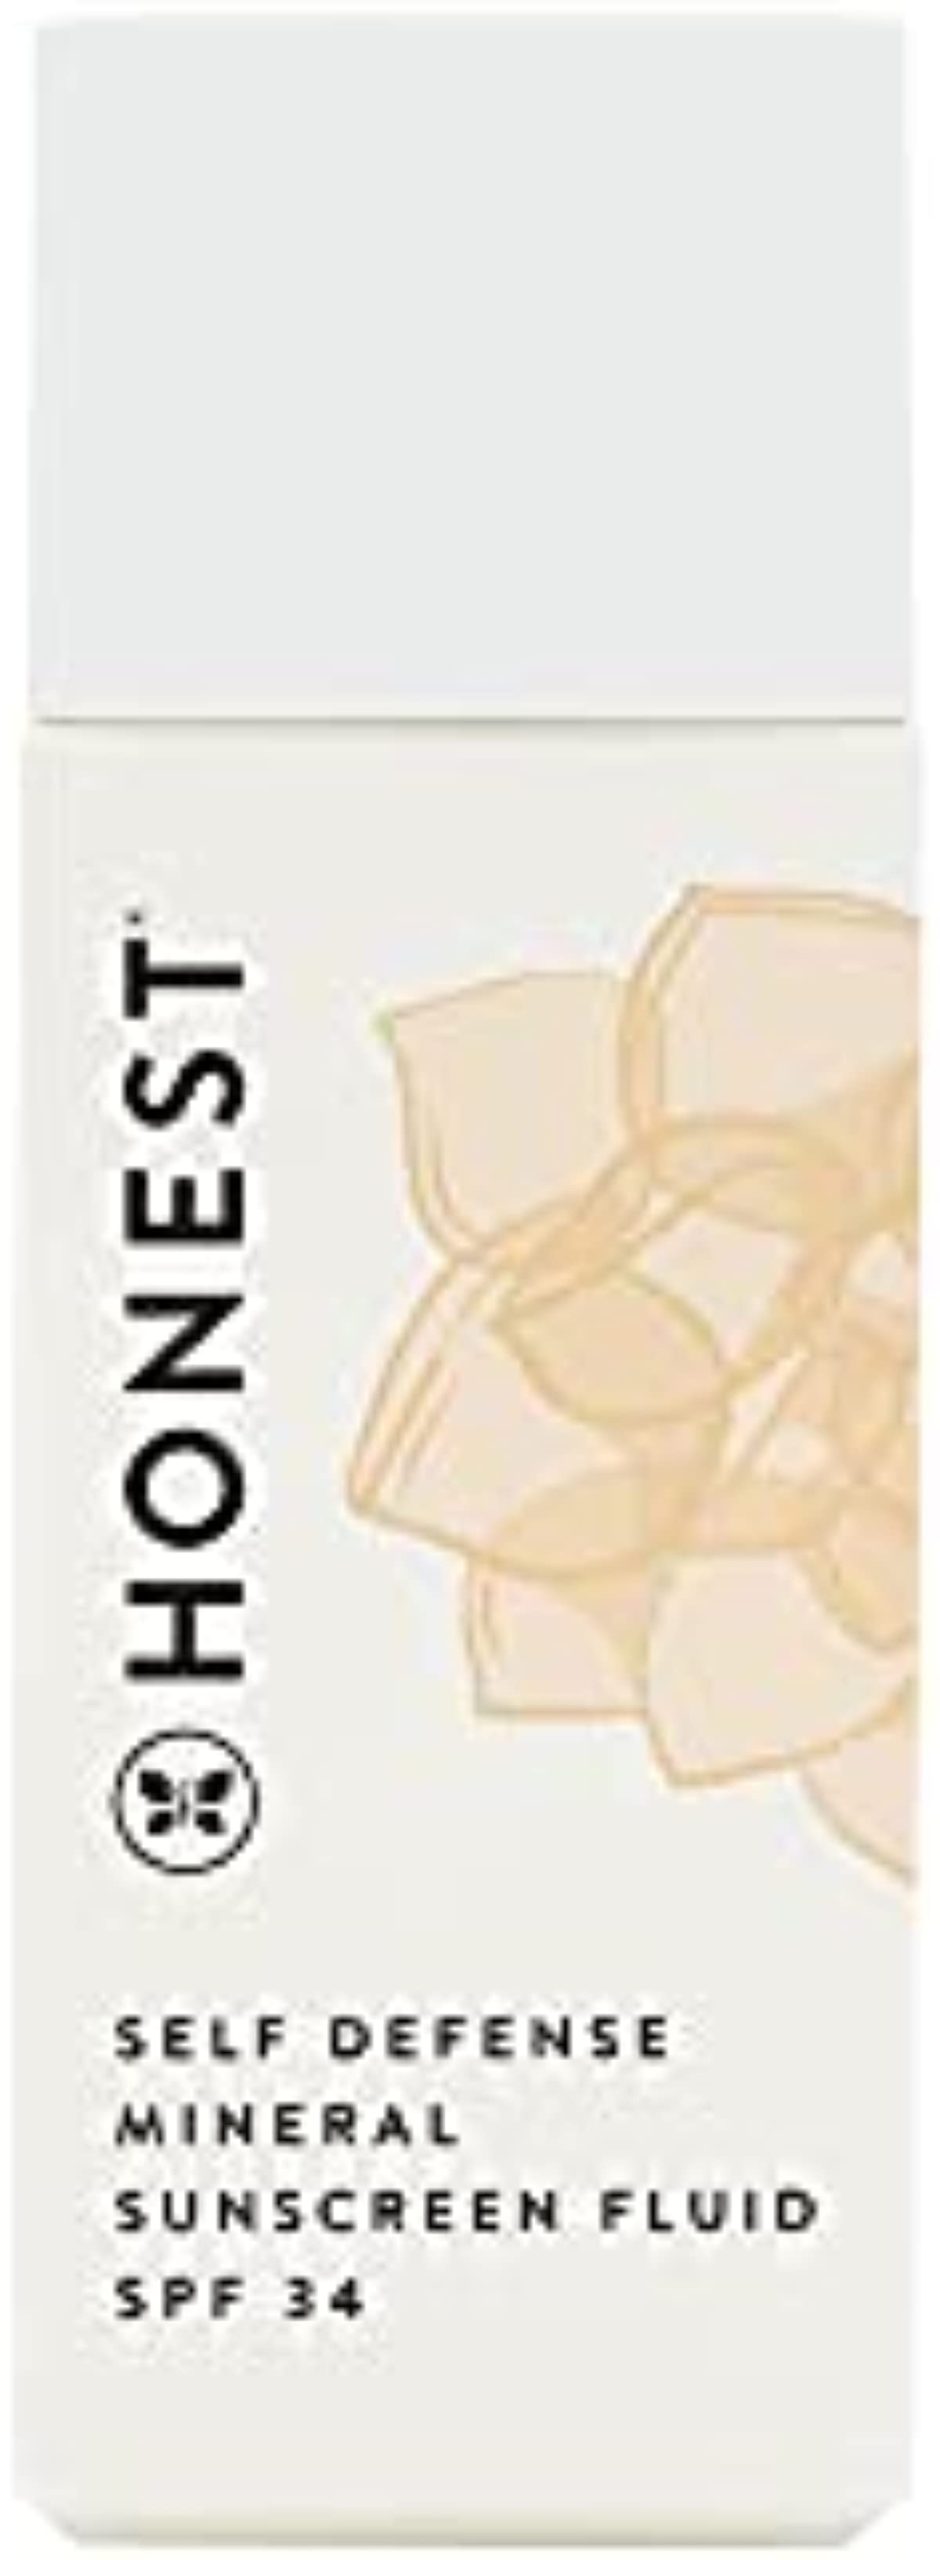 Honest Beauty Self Defense Protecting Mineral Sunscreen Fluid Spf 34 with Non Nano Nineral Sunscreen Fluid | Daily Face Sunscreen | Dermatologist tested + Hypoallergenic | Reef friendly | 1 fl. oz.